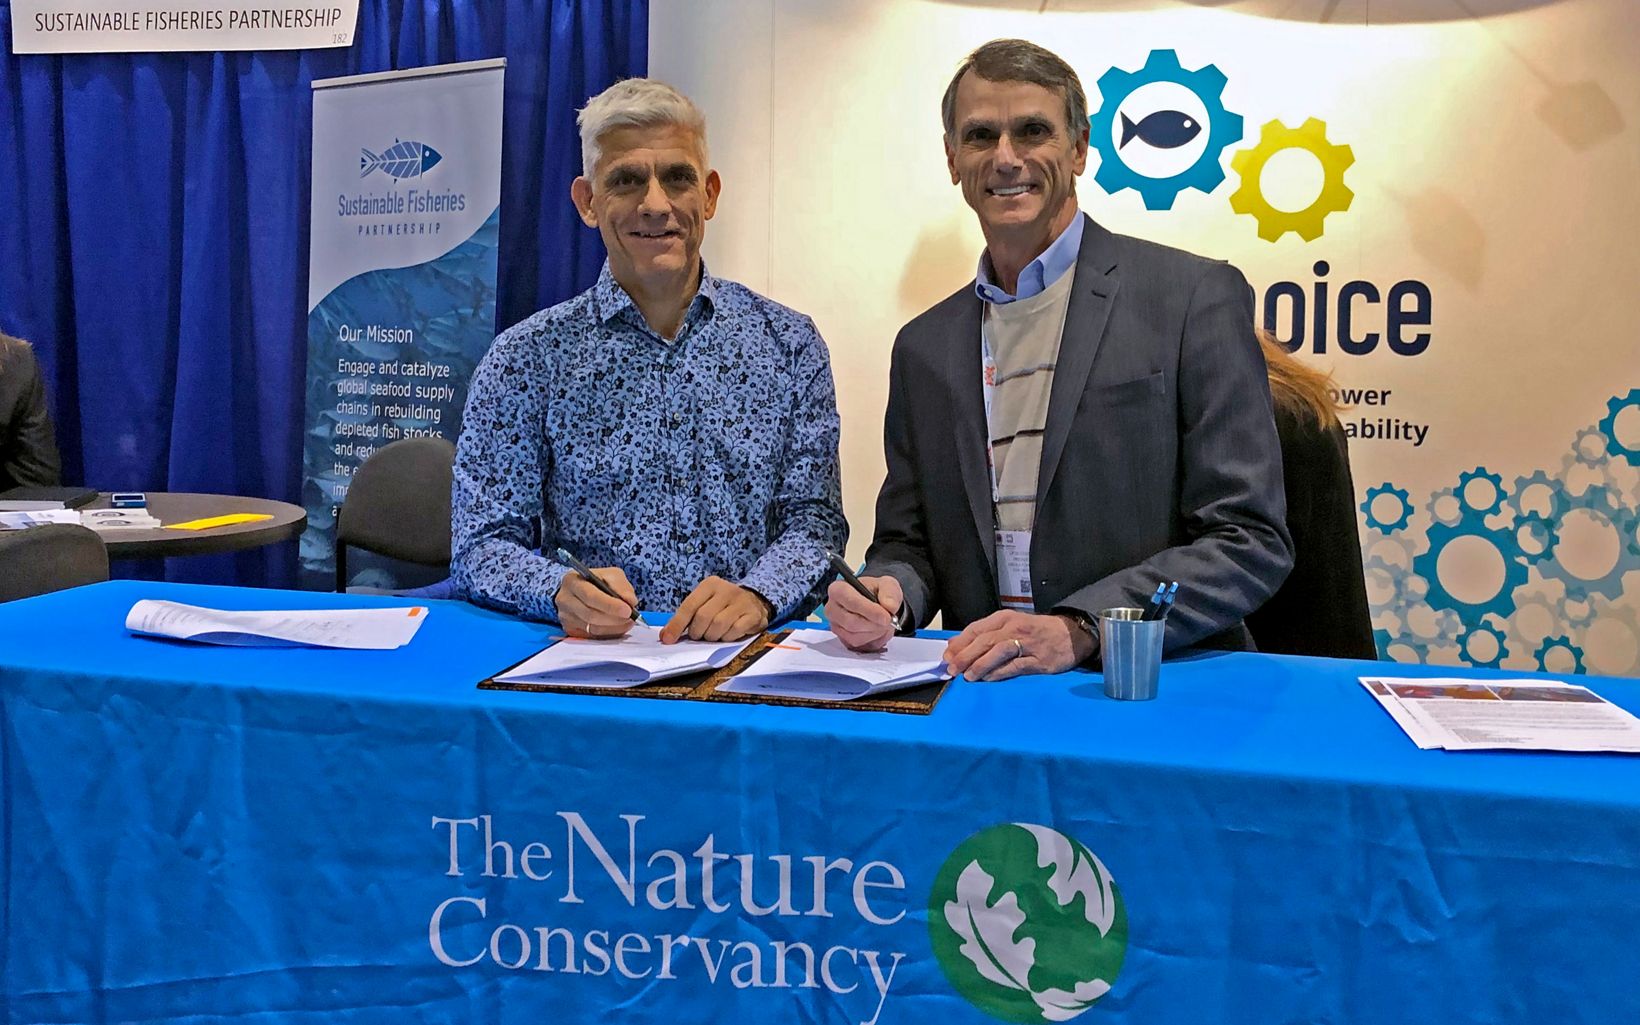 Signing for Snapper (From left) Peter Mous, Director of TNC Indonesia Fisheries Program with Don George of Bumble Bee Foods (owner of Anova Food LLC). © TNC